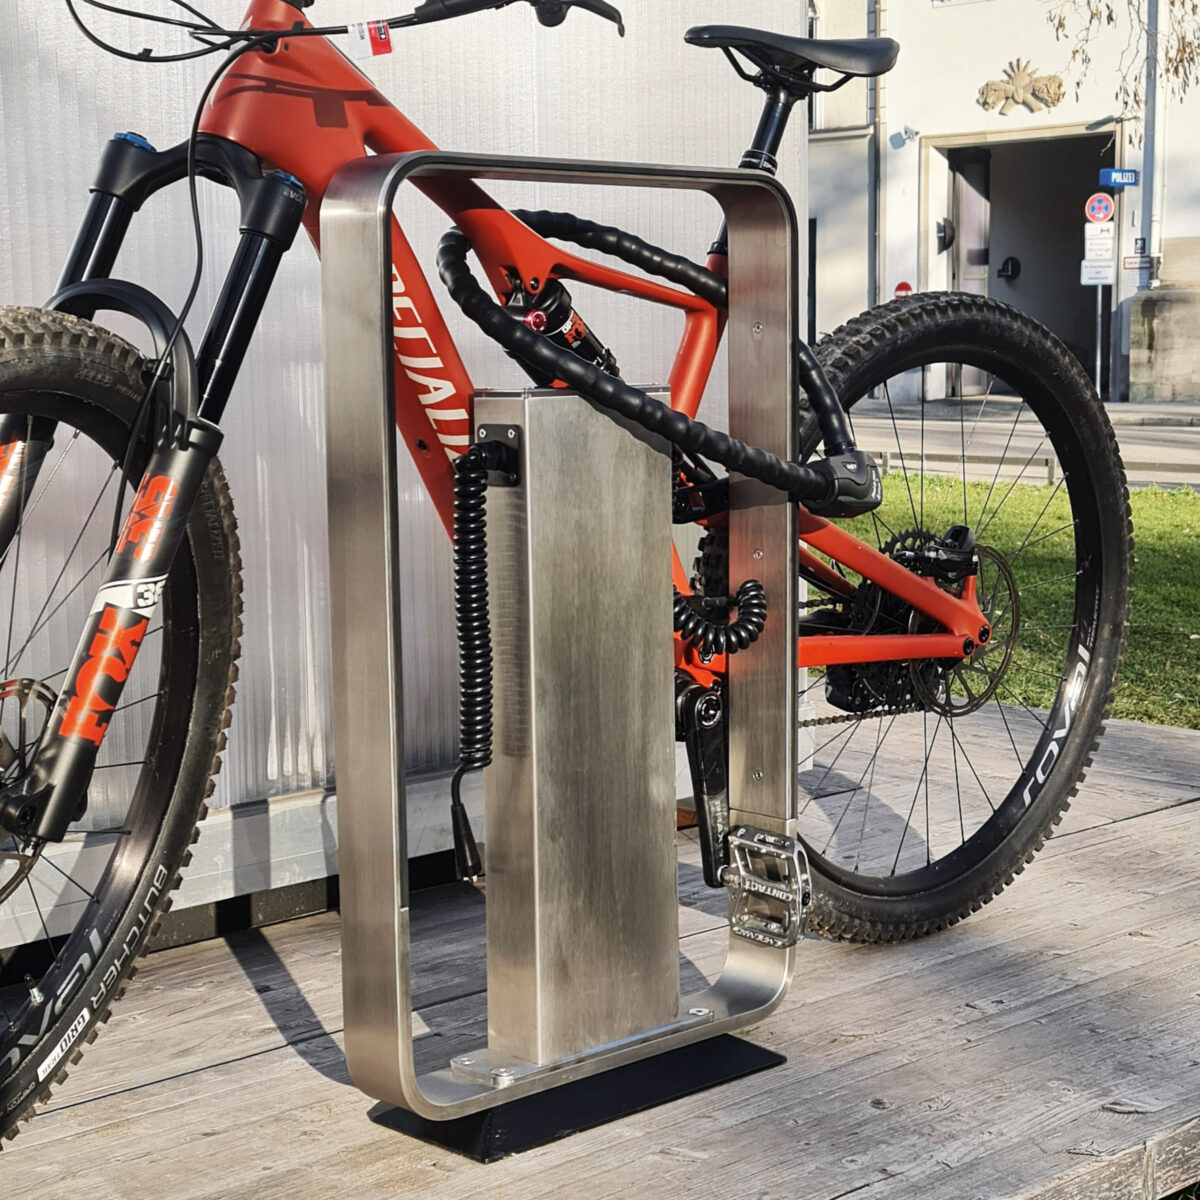 Lockable Bike on Frame lockable Parking space for 2 bicycles